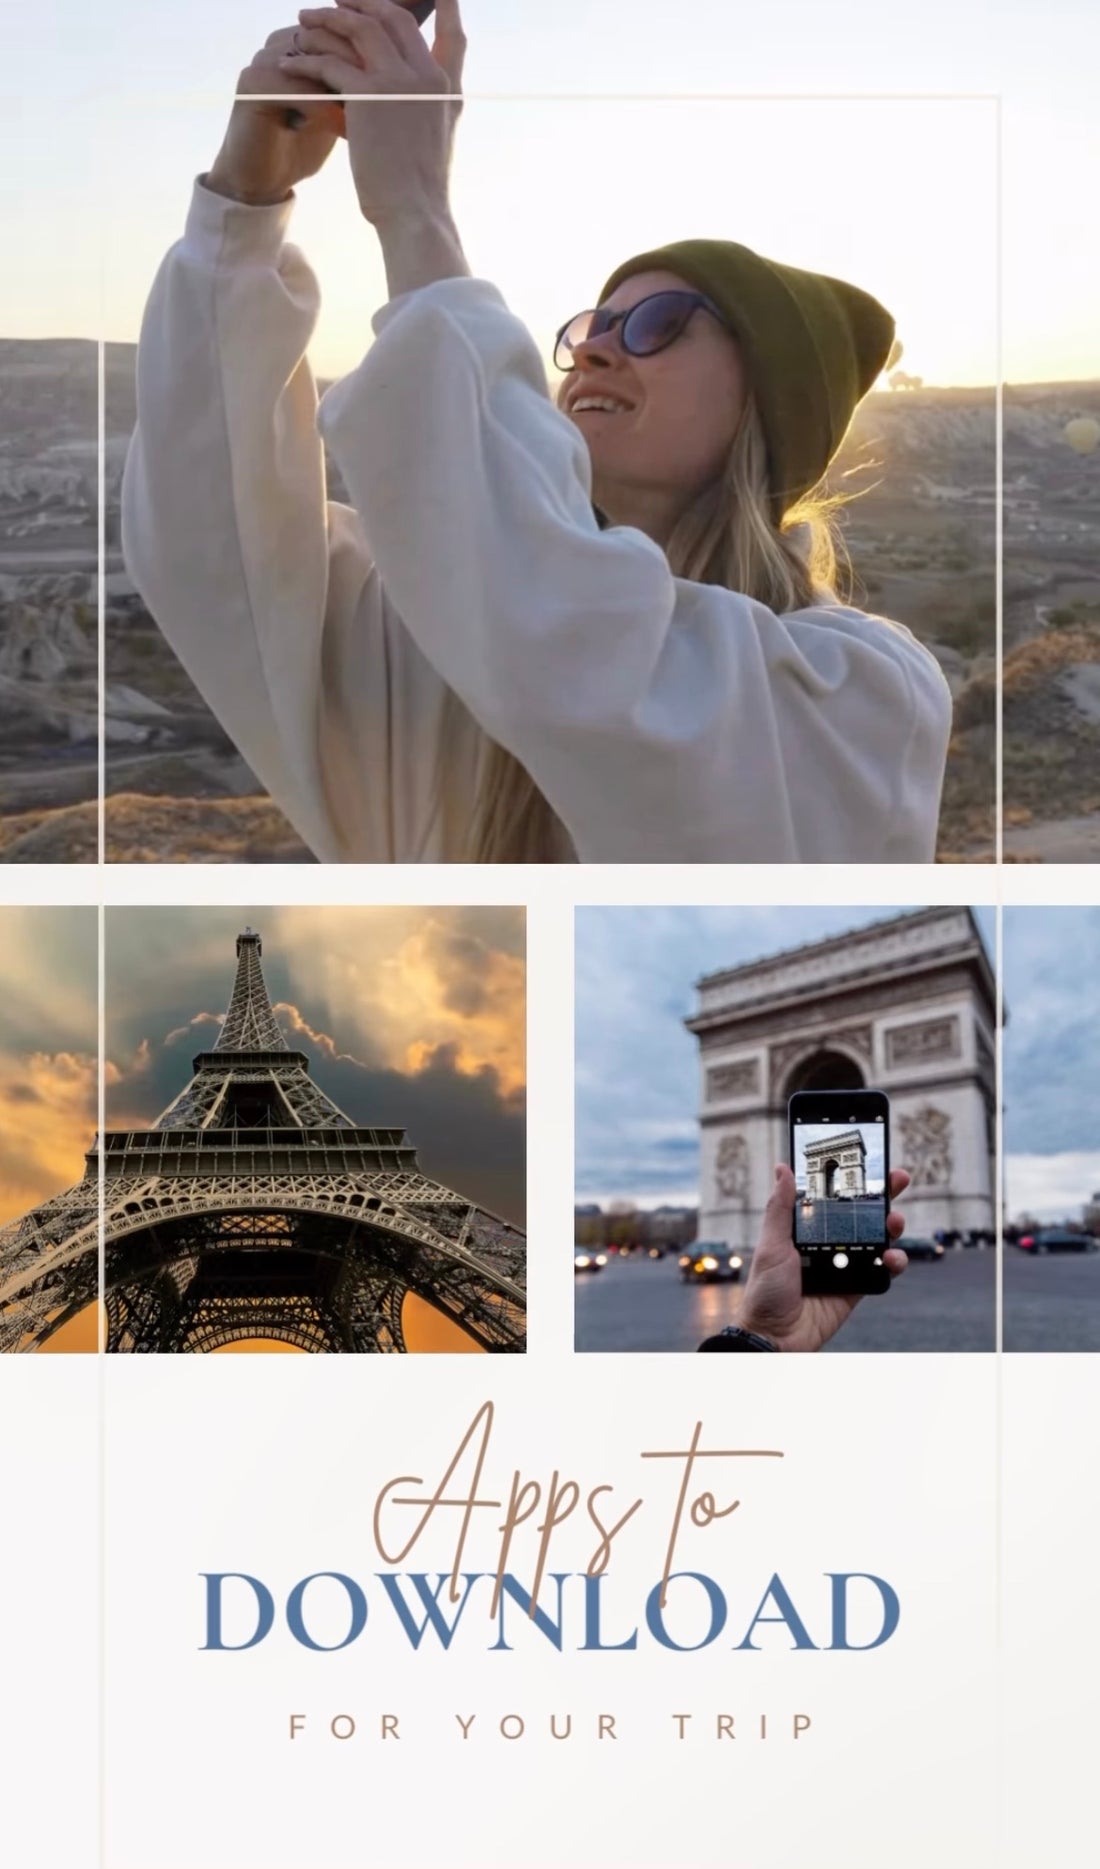 Here are some of my favorite apps to help you navigate and enjoy your journey through France.